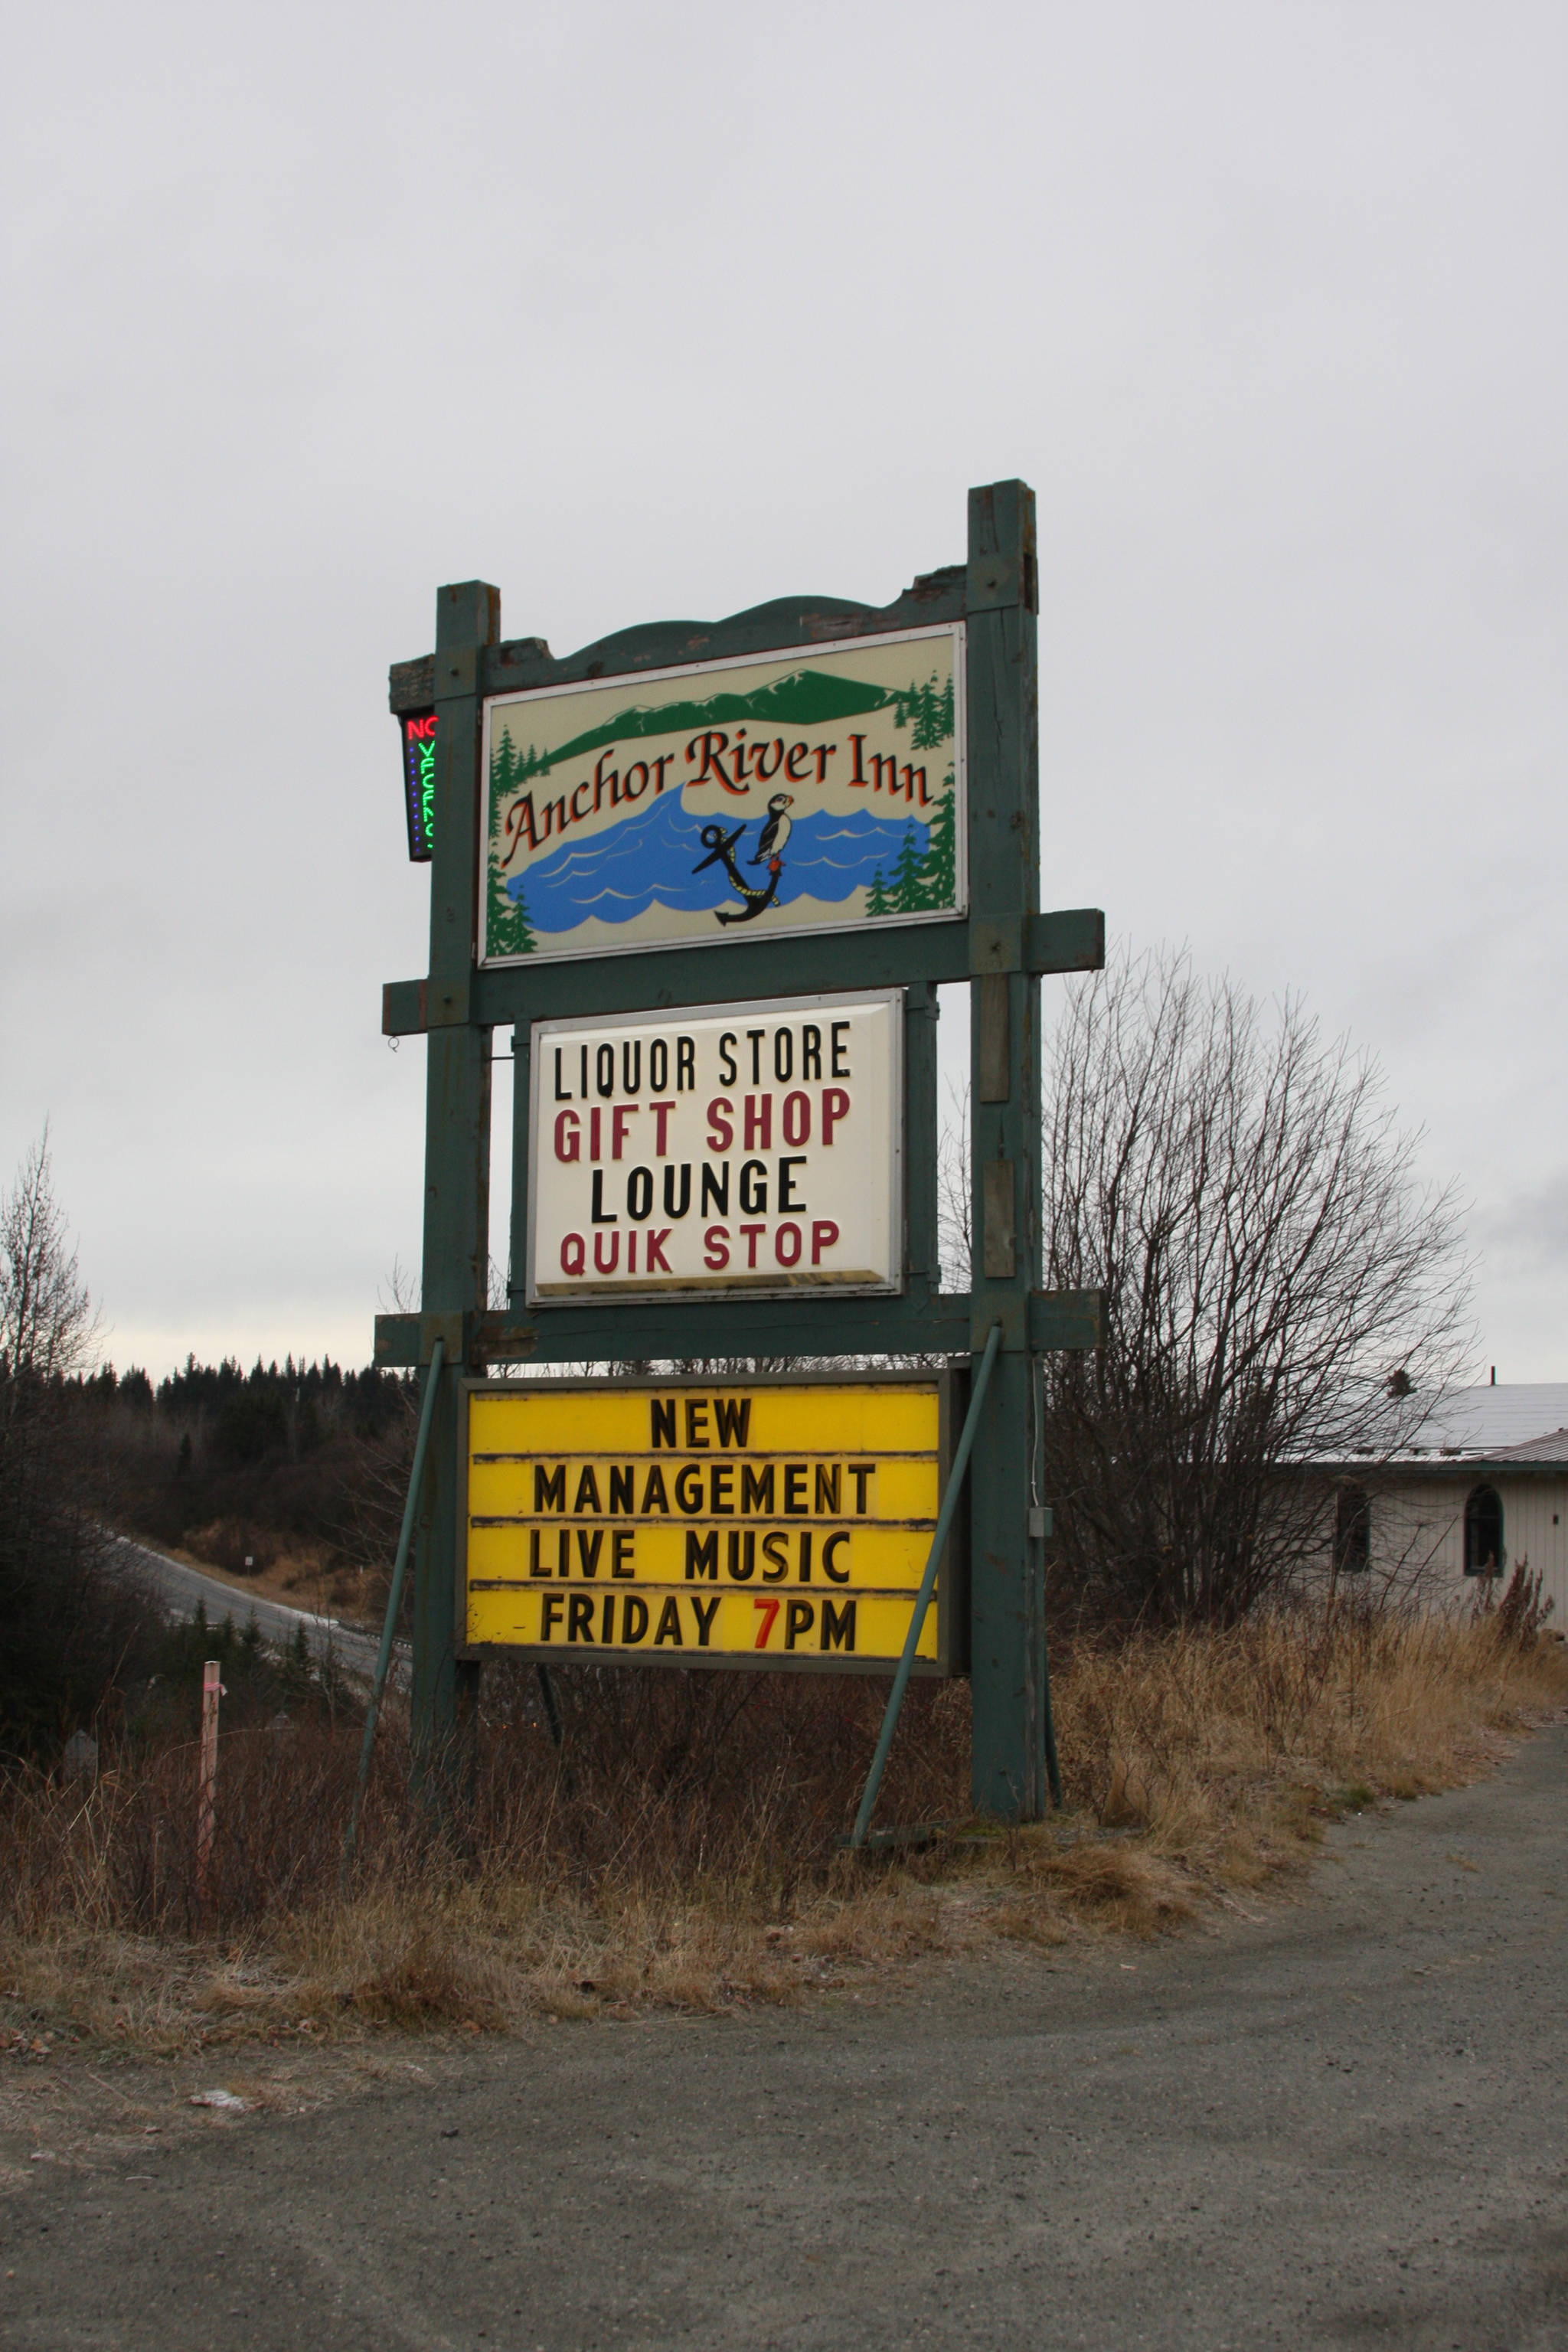 The Anchor River Inn sign overlooks the Sterling Highway on Nov. 10, 2018, in Anchor Point, Alaska, announcing that the business is under new management. (Photo by Delcenia Cosman)